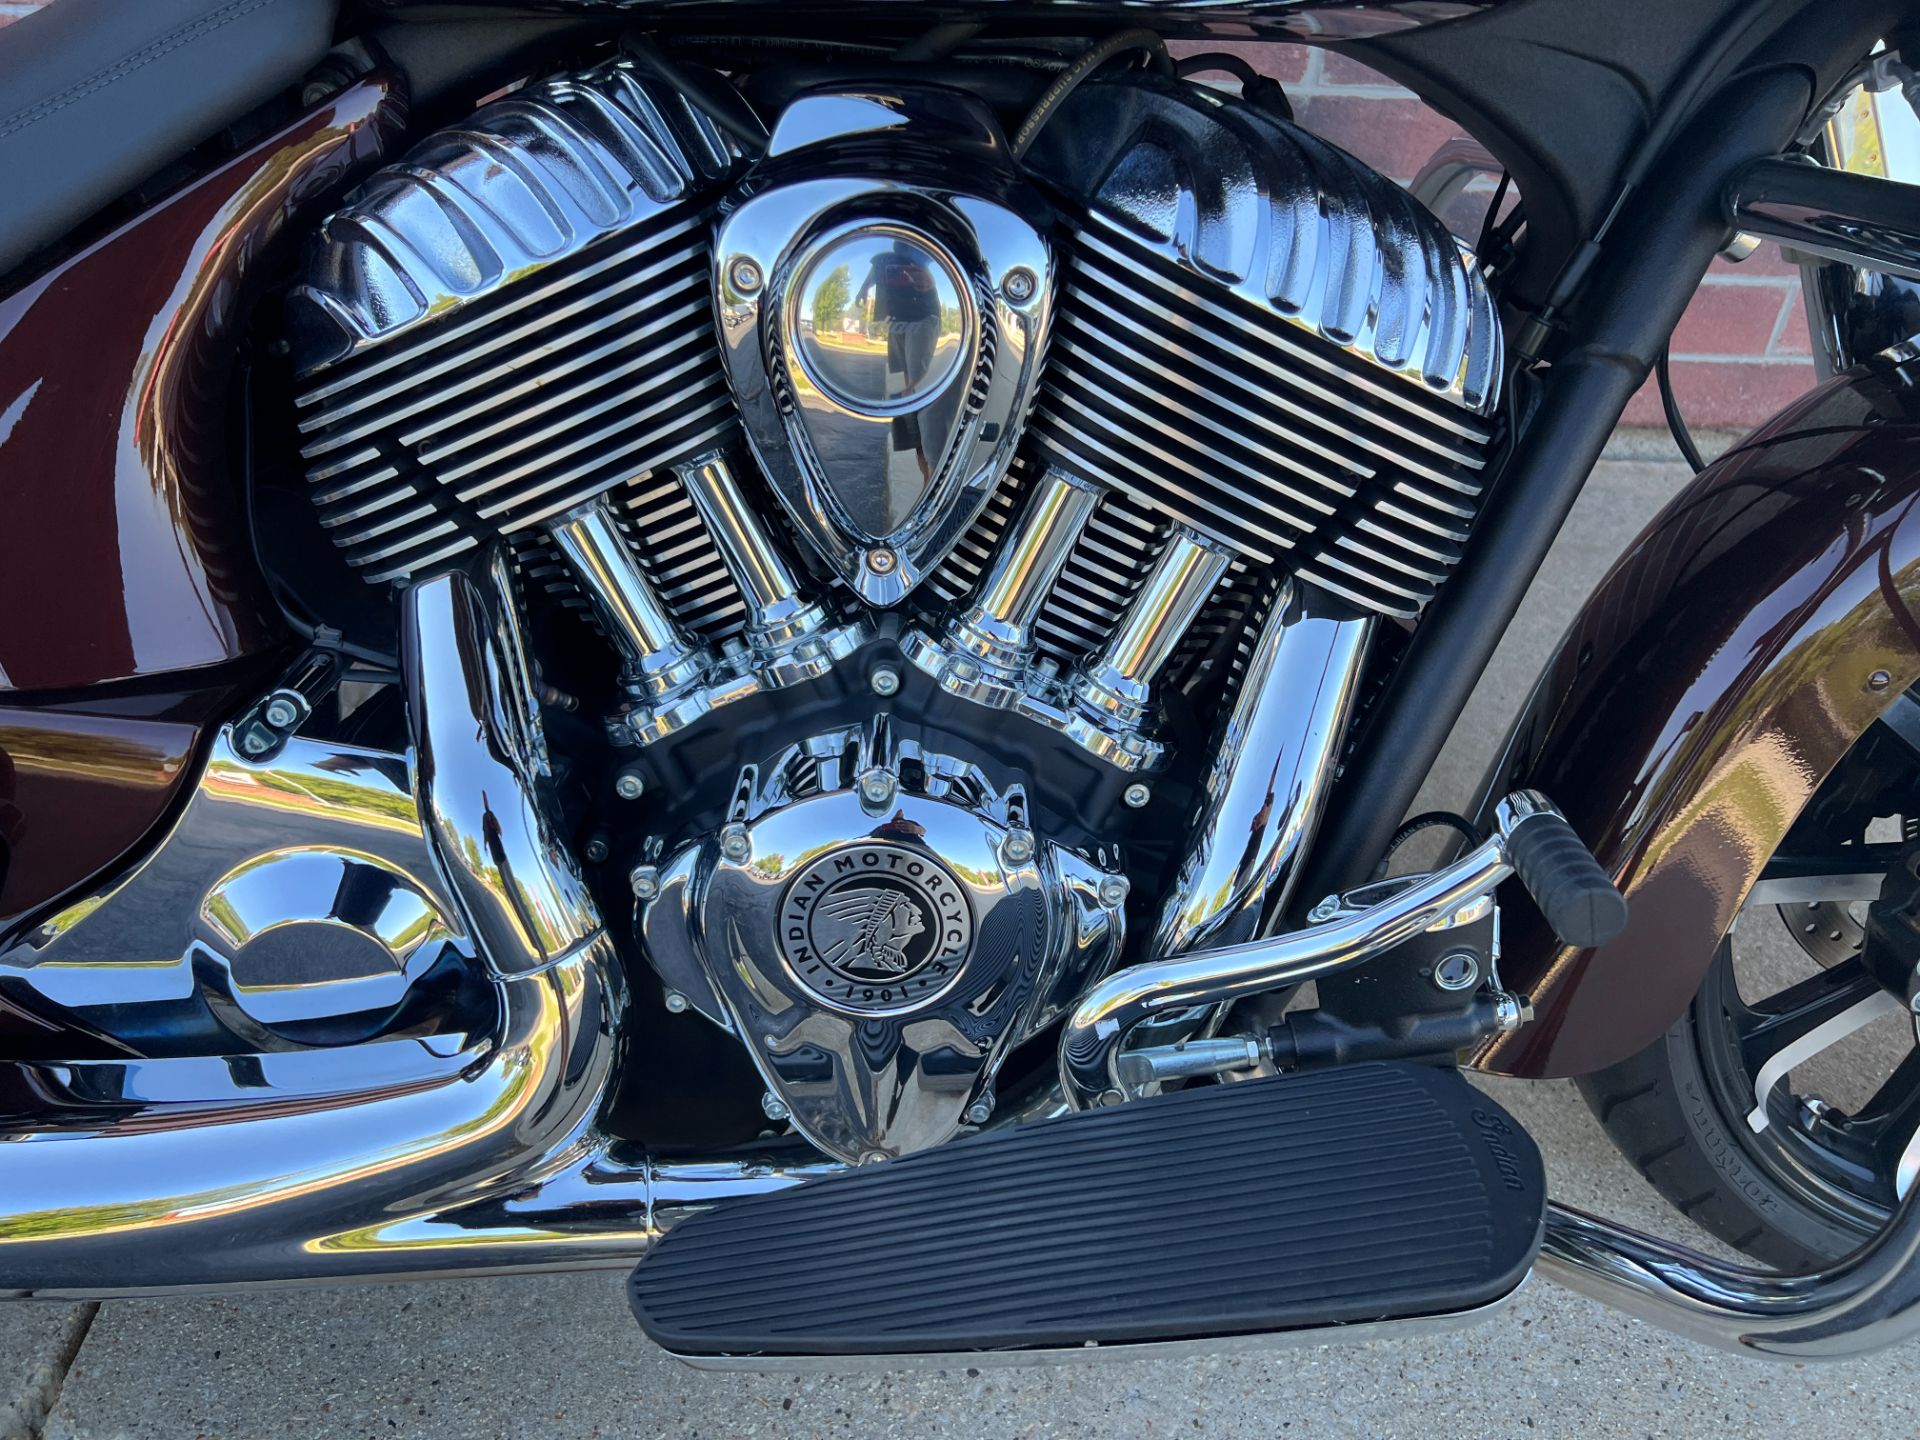 2019 Indian Chieftain® Limited ABS in Muskego, Wisconsin - Photo 6